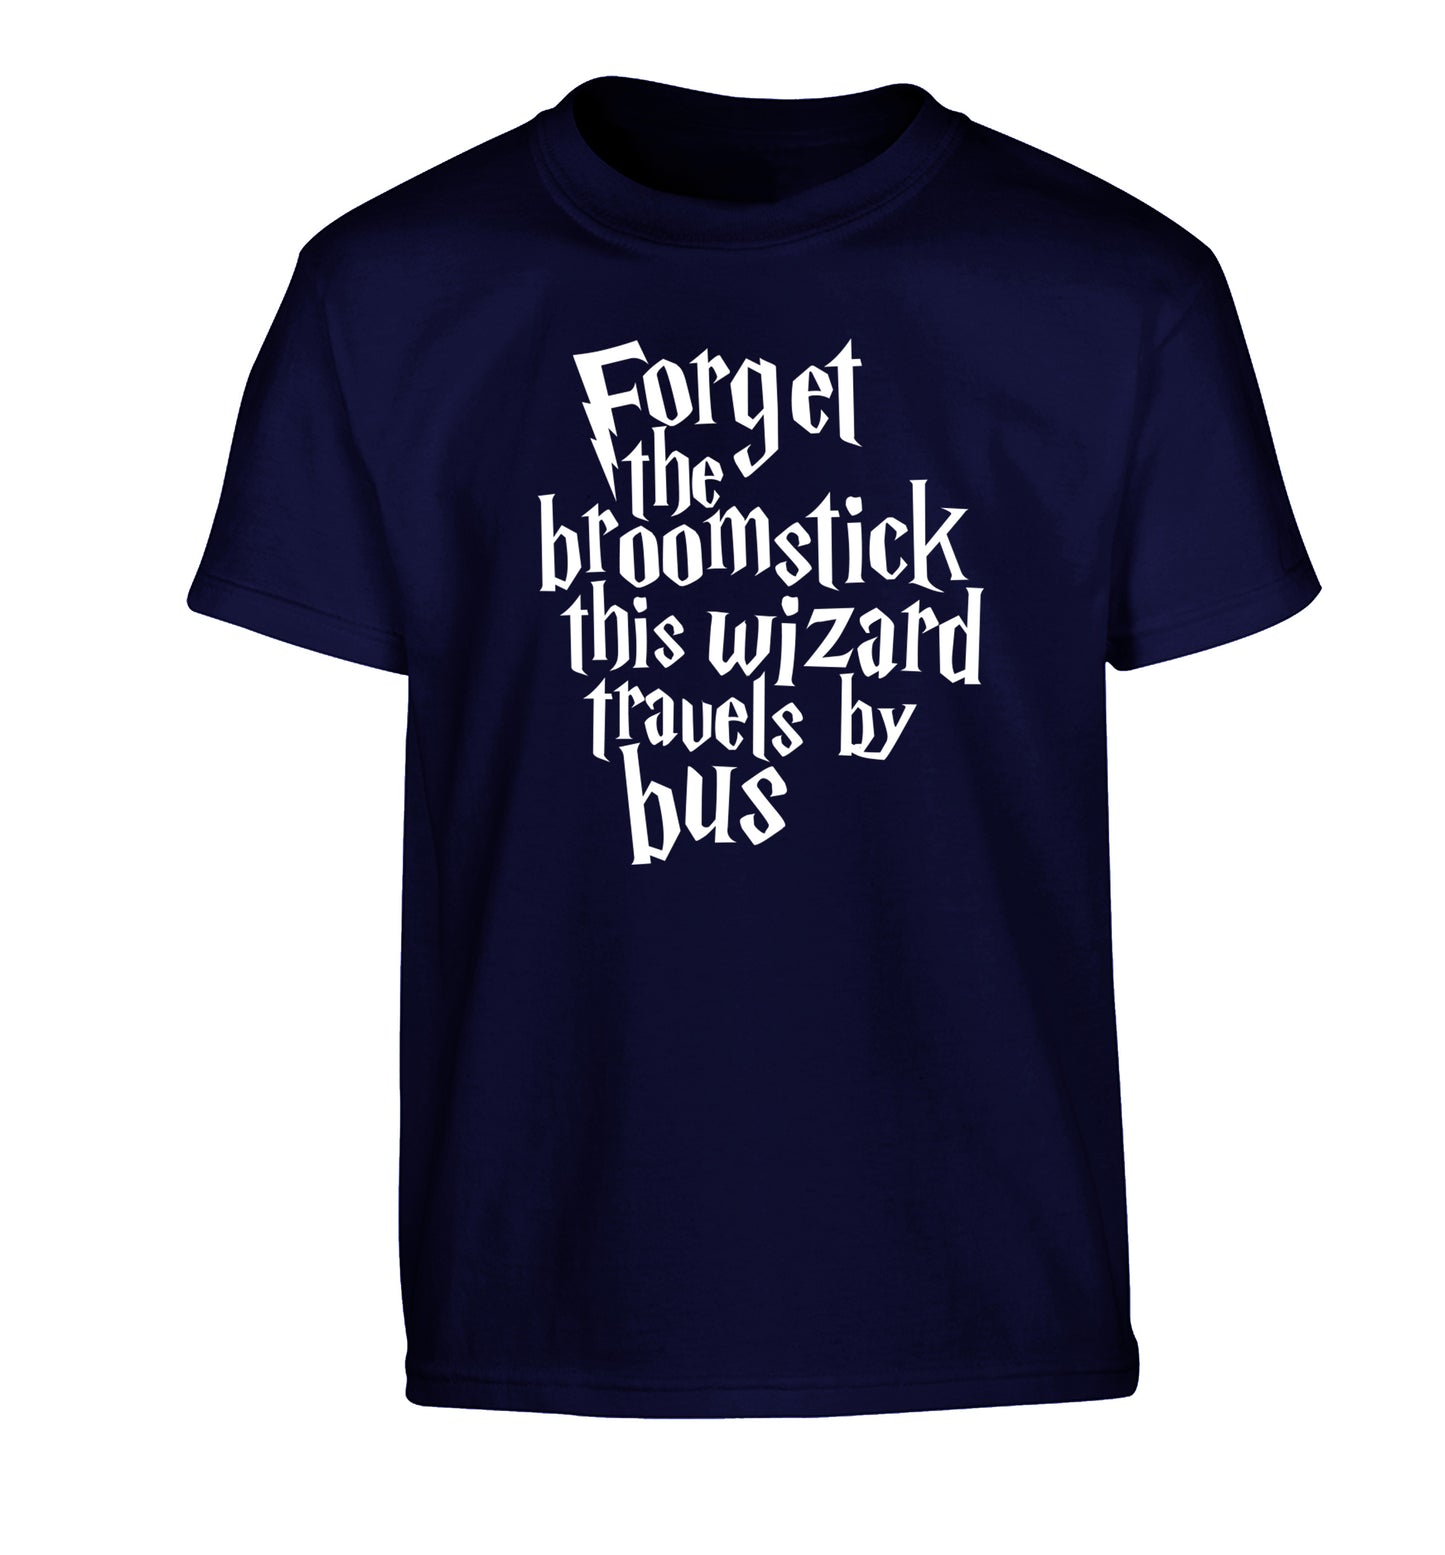 Forget the broomstick this wizard travels by bus Children's navy Tshirt 12-14 Years